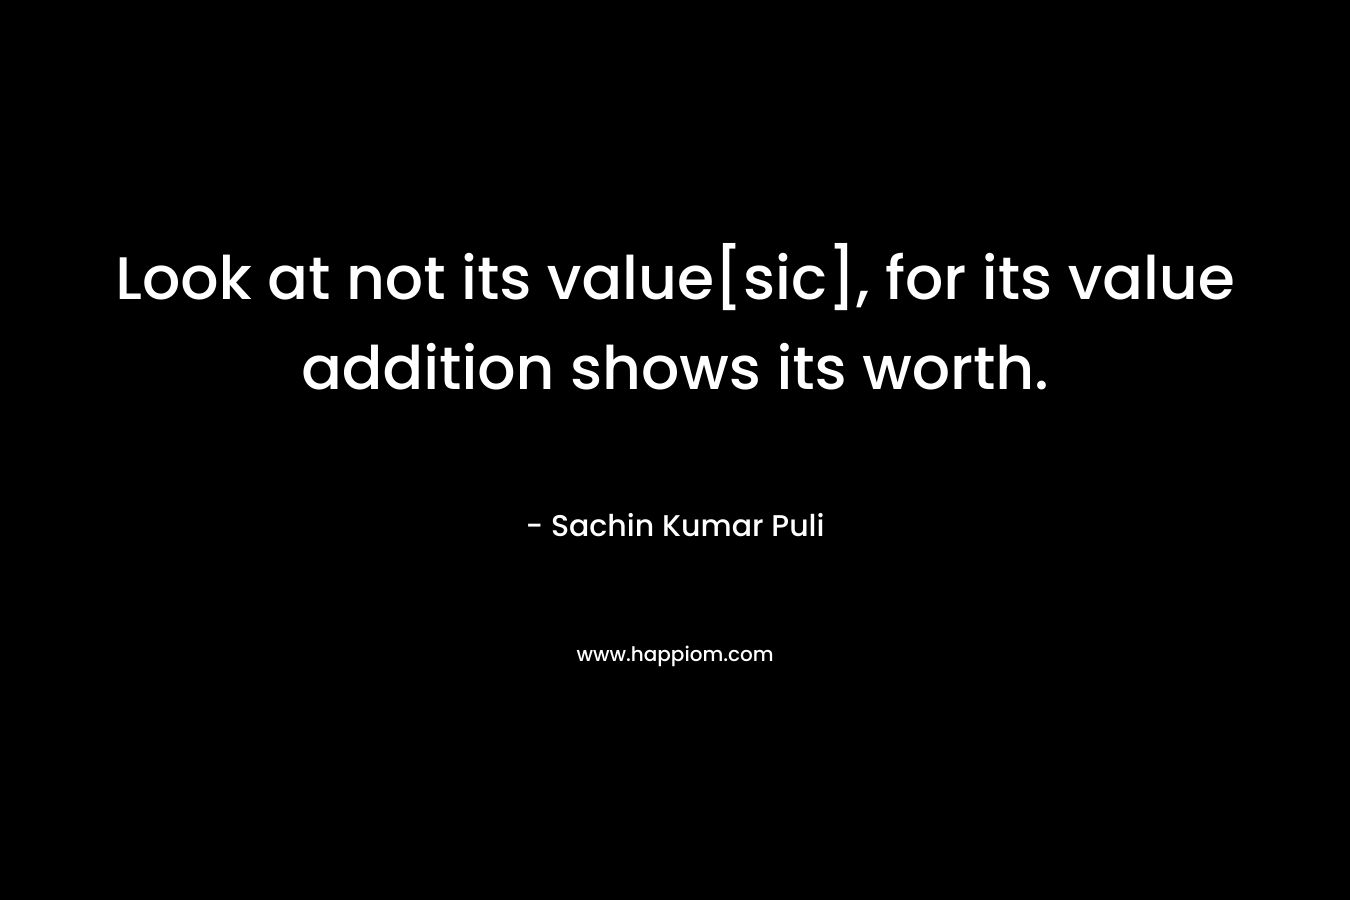 Look at not its value[sic], for its value addition shows its worth. – Sachin Kumar Puli